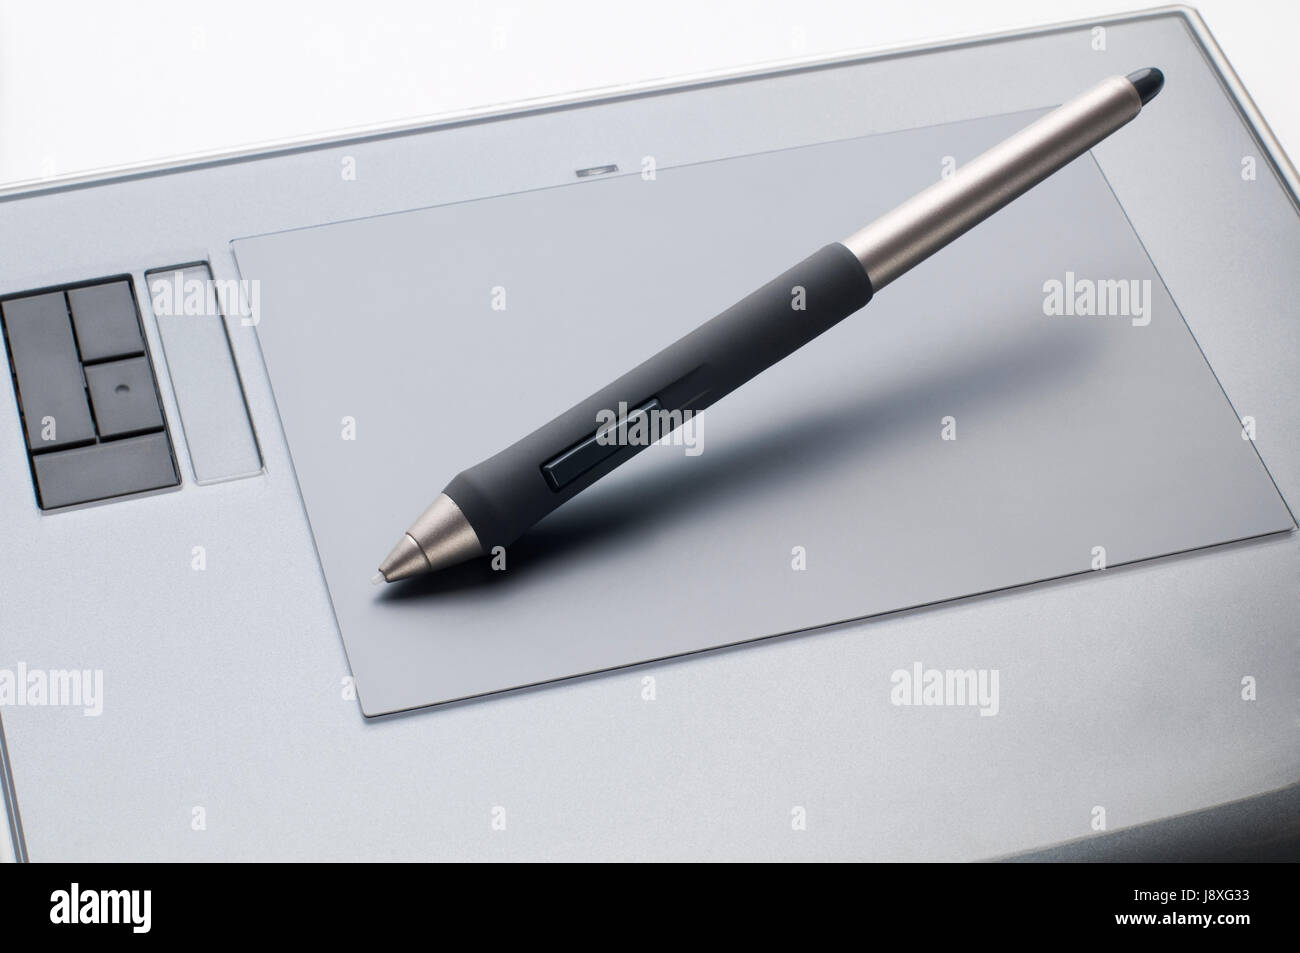 graphic, tablet, conspicuous, pictographic, transparent, computers, computer, Stock Photo